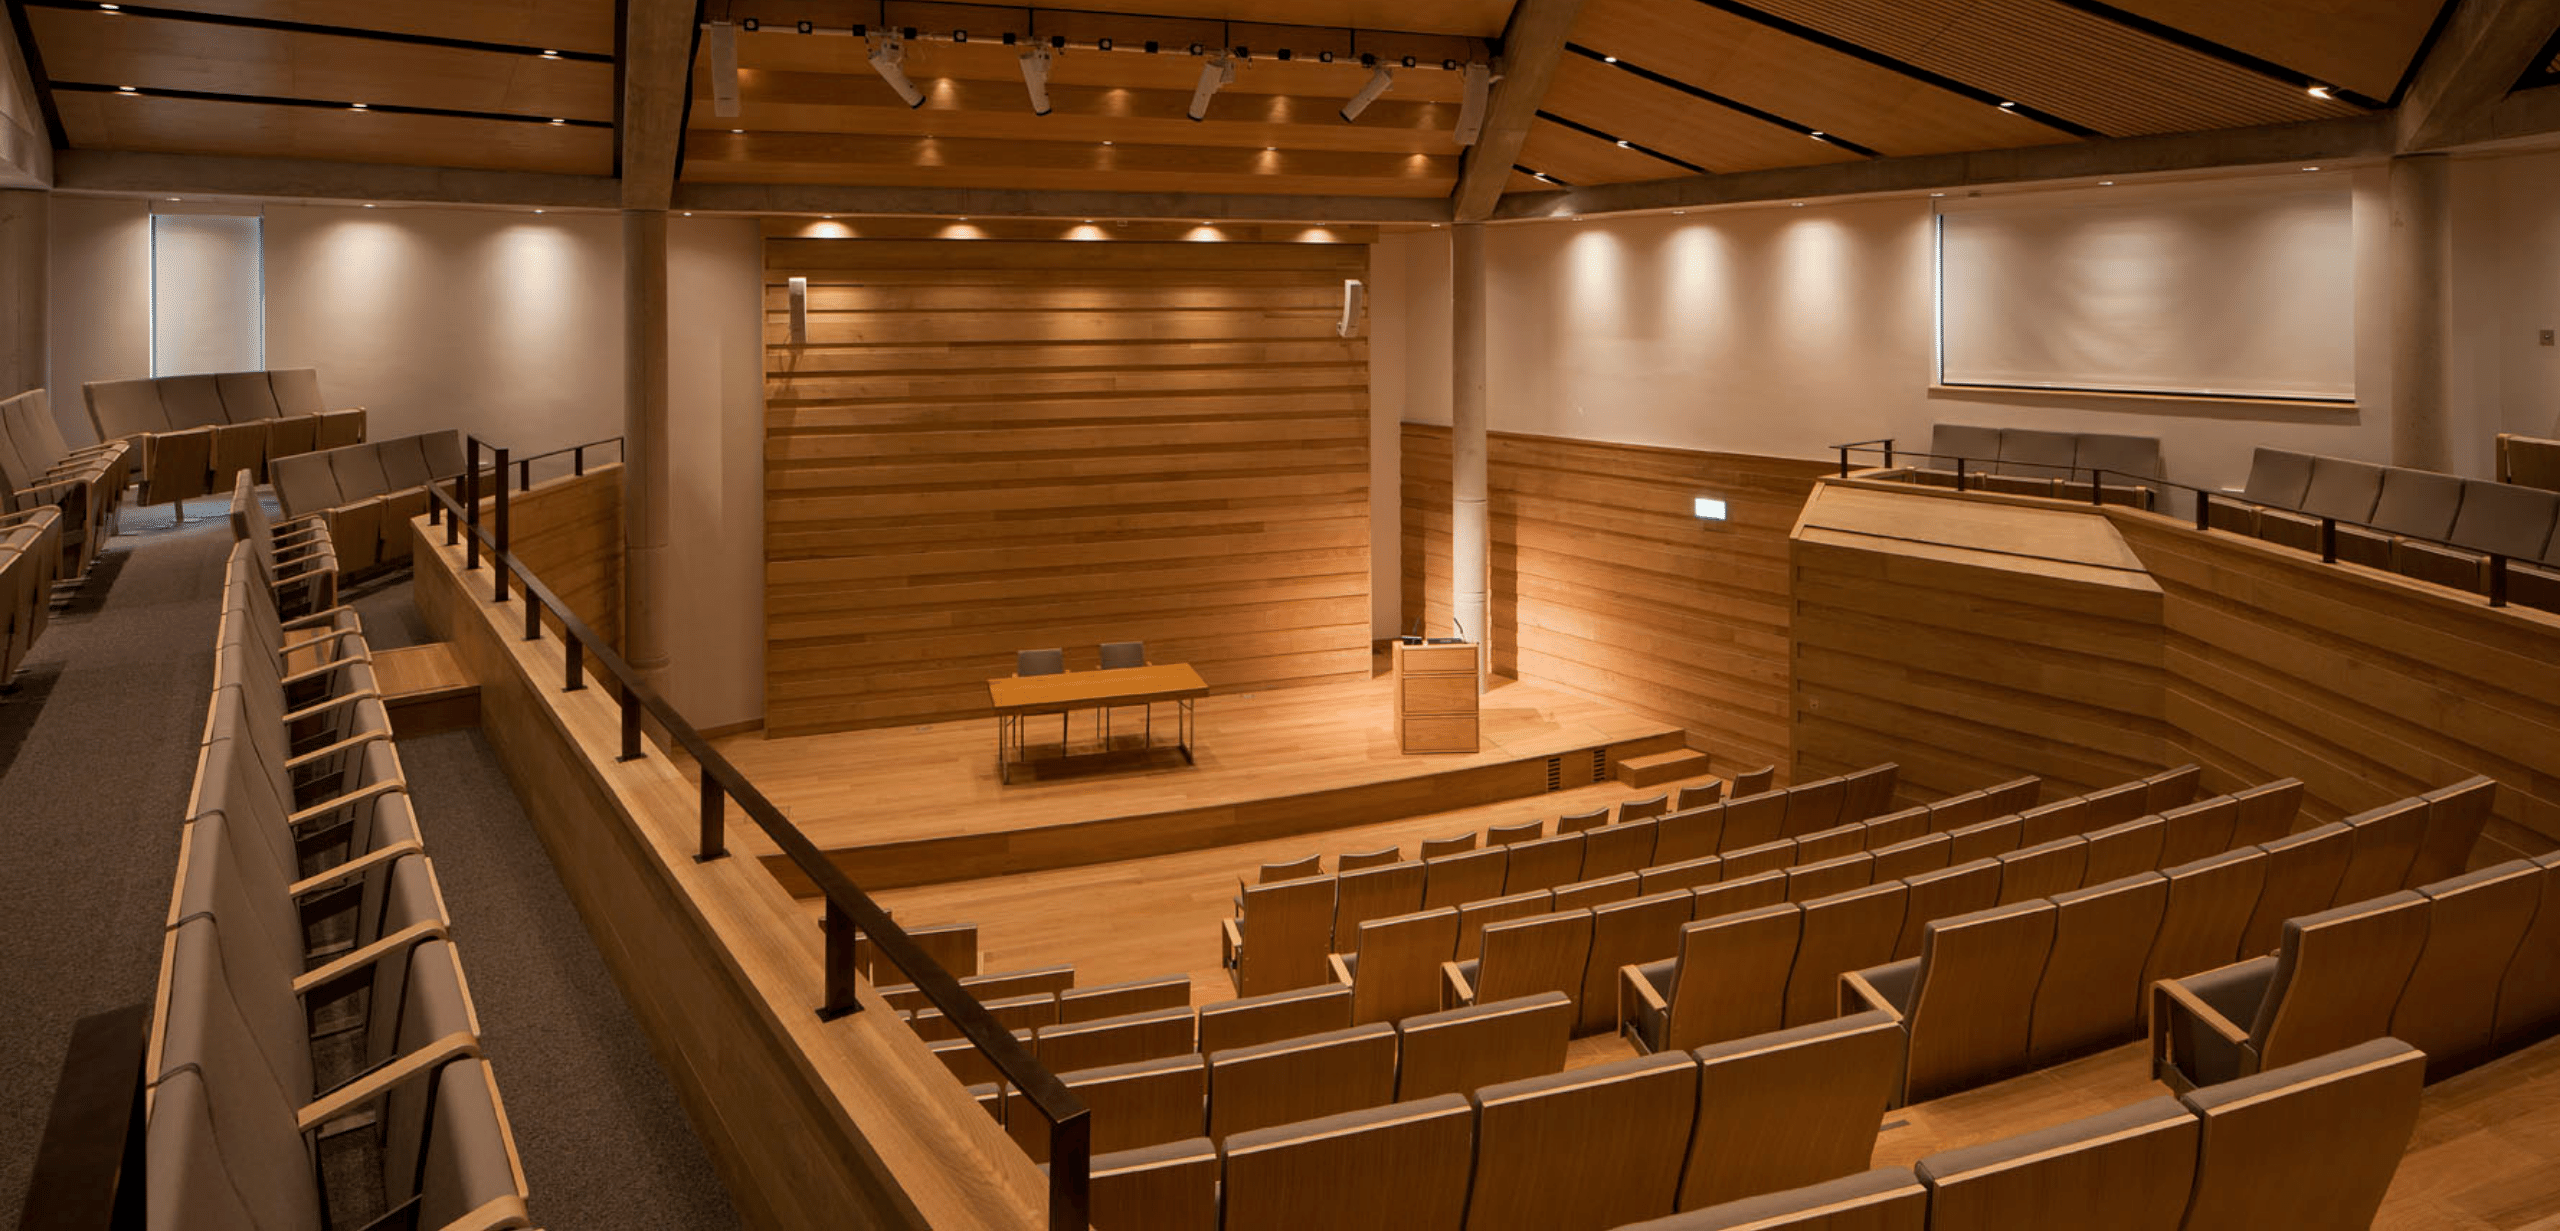 An auditorium with wooden tiered seating and a wooden ceiling.